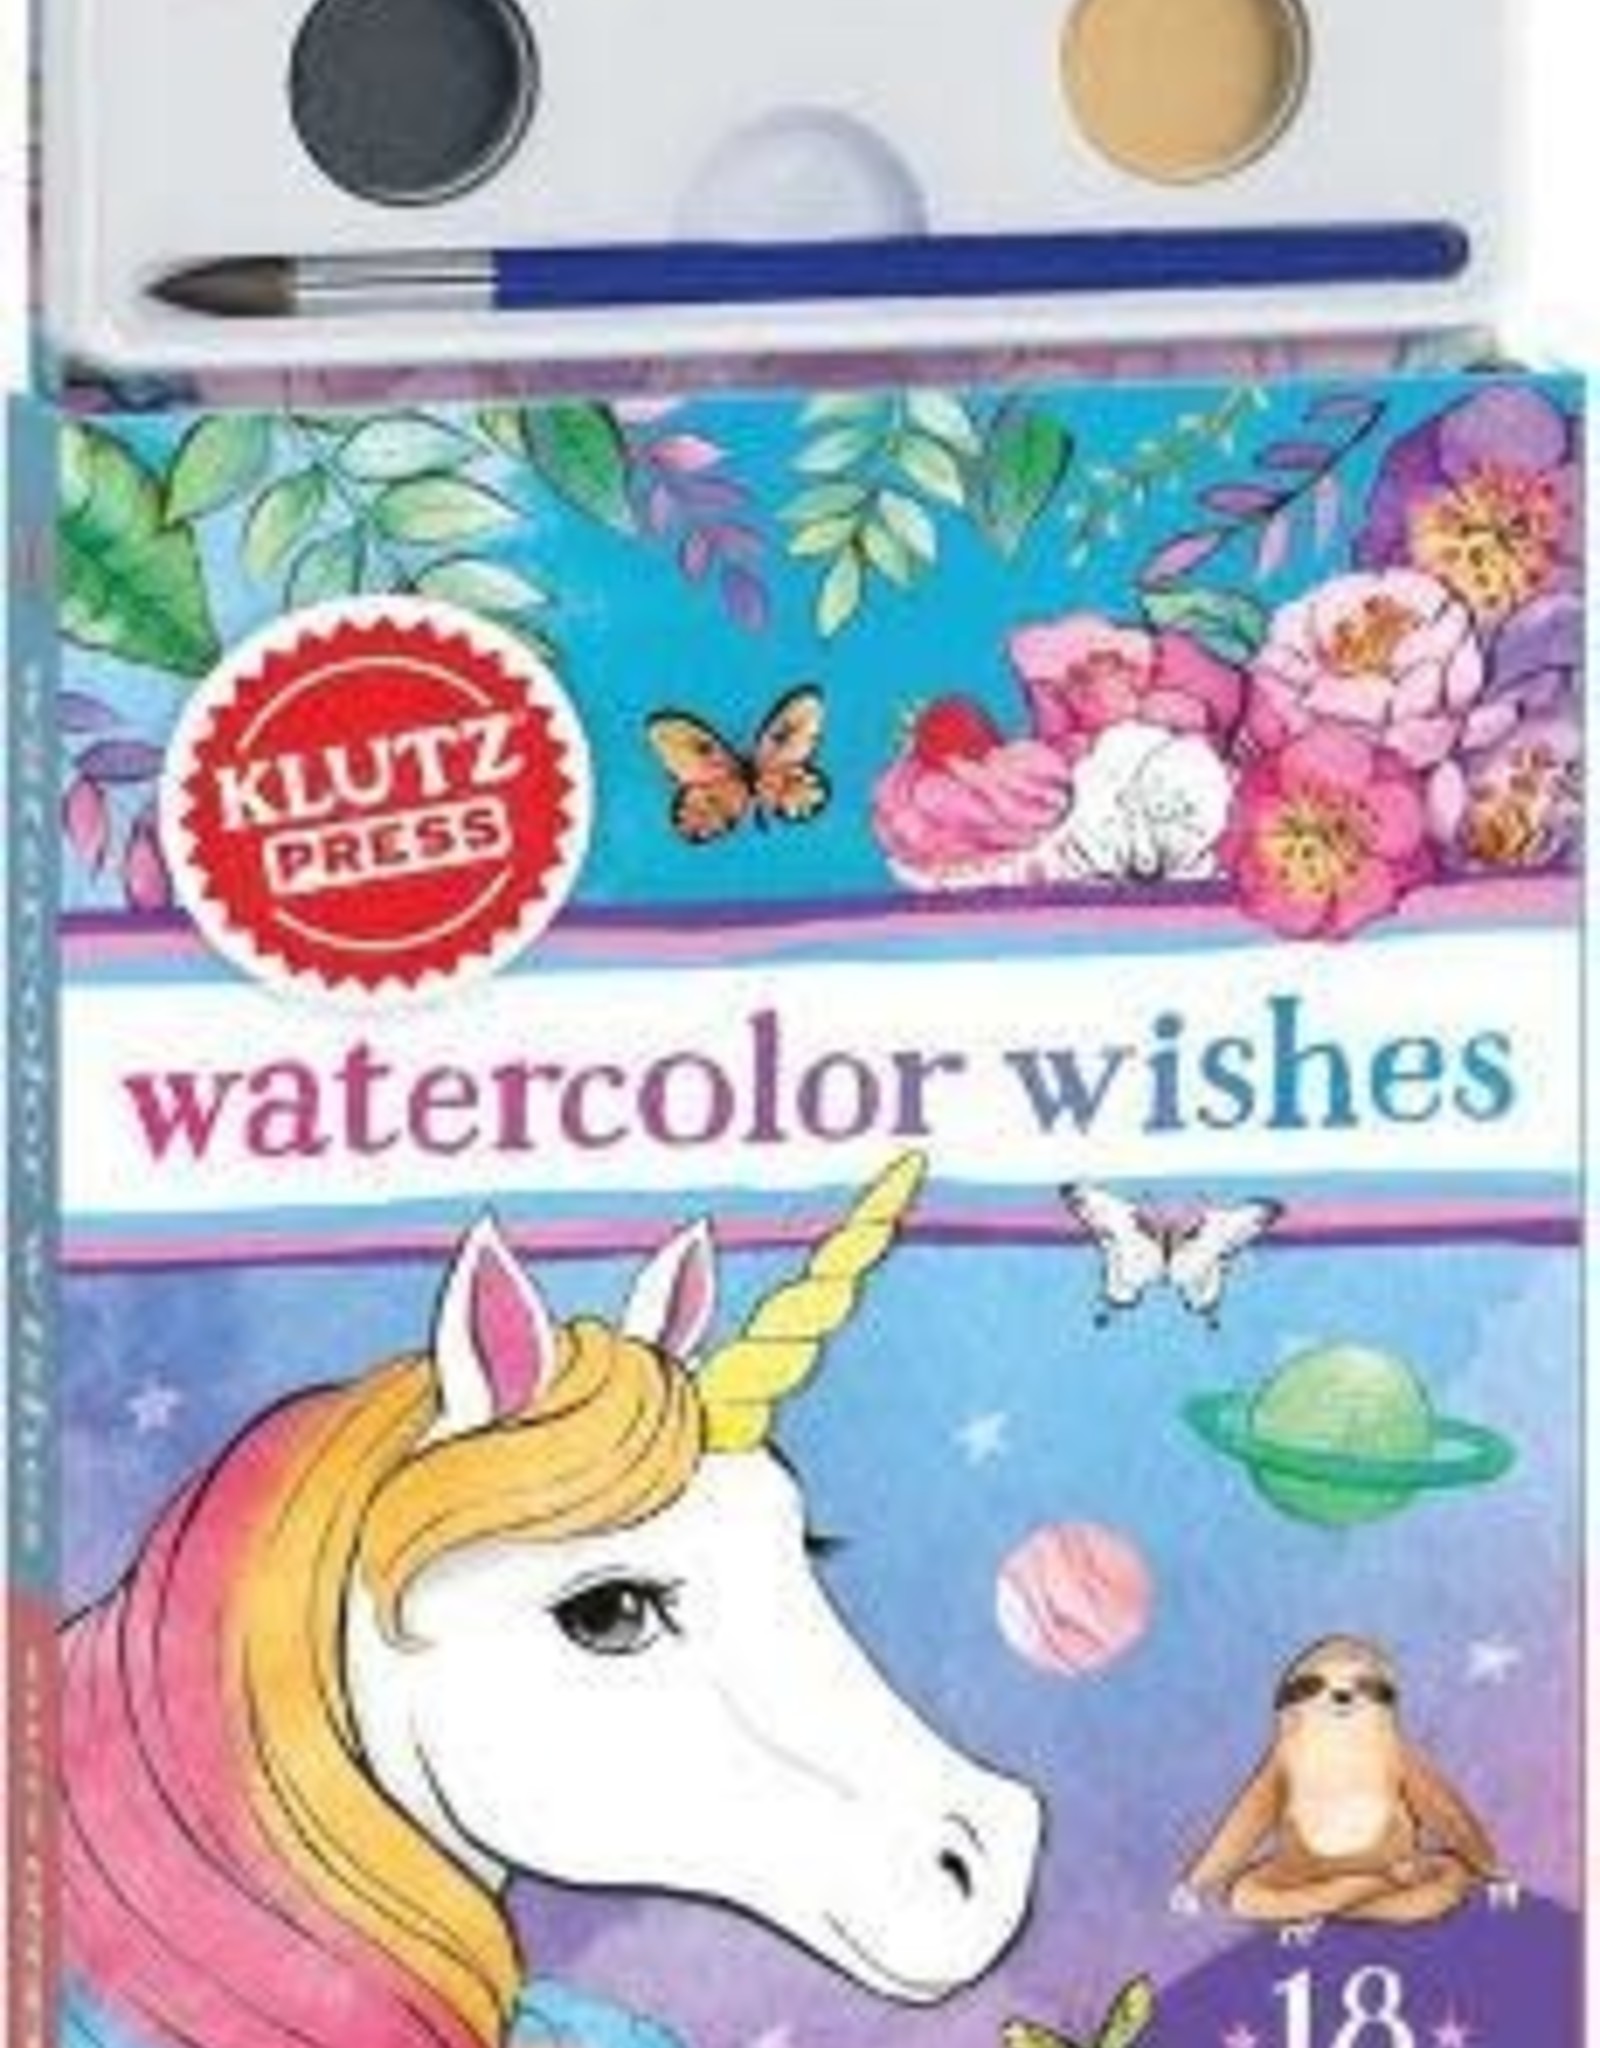 WATERCOLOR WISHES